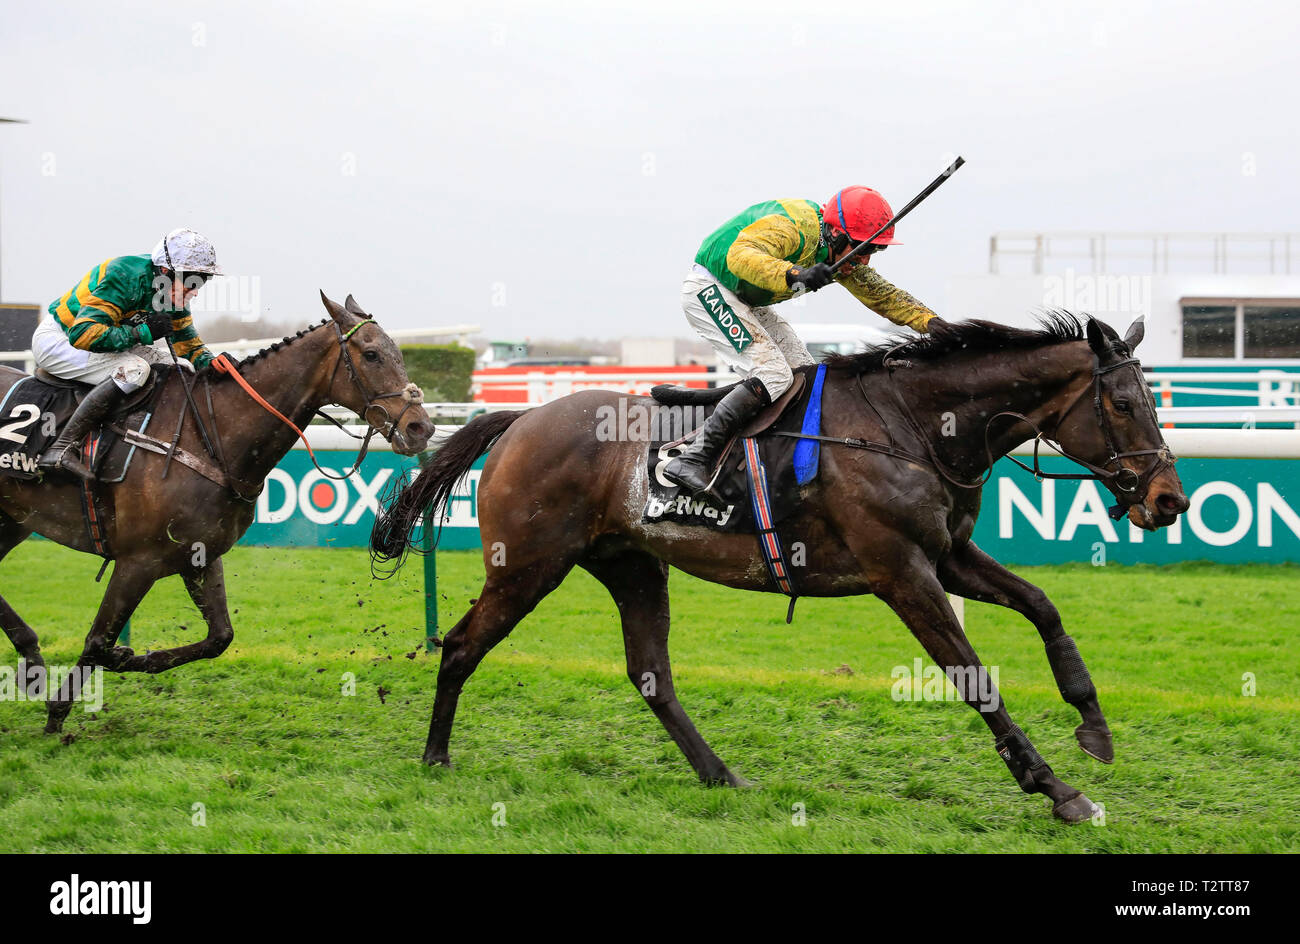 Aintree Racecourse, Aintree, UK. 4th Apr, 2019. The 2019 Grand National horse racing festival, day 1; Supasundae ridden by Robbie Power wins The Betway Aintree Hurdle from Buveur D'Air ridden by Barry Geraghty Credit: Action Plus Sports/Alamy Live News Stock Photo